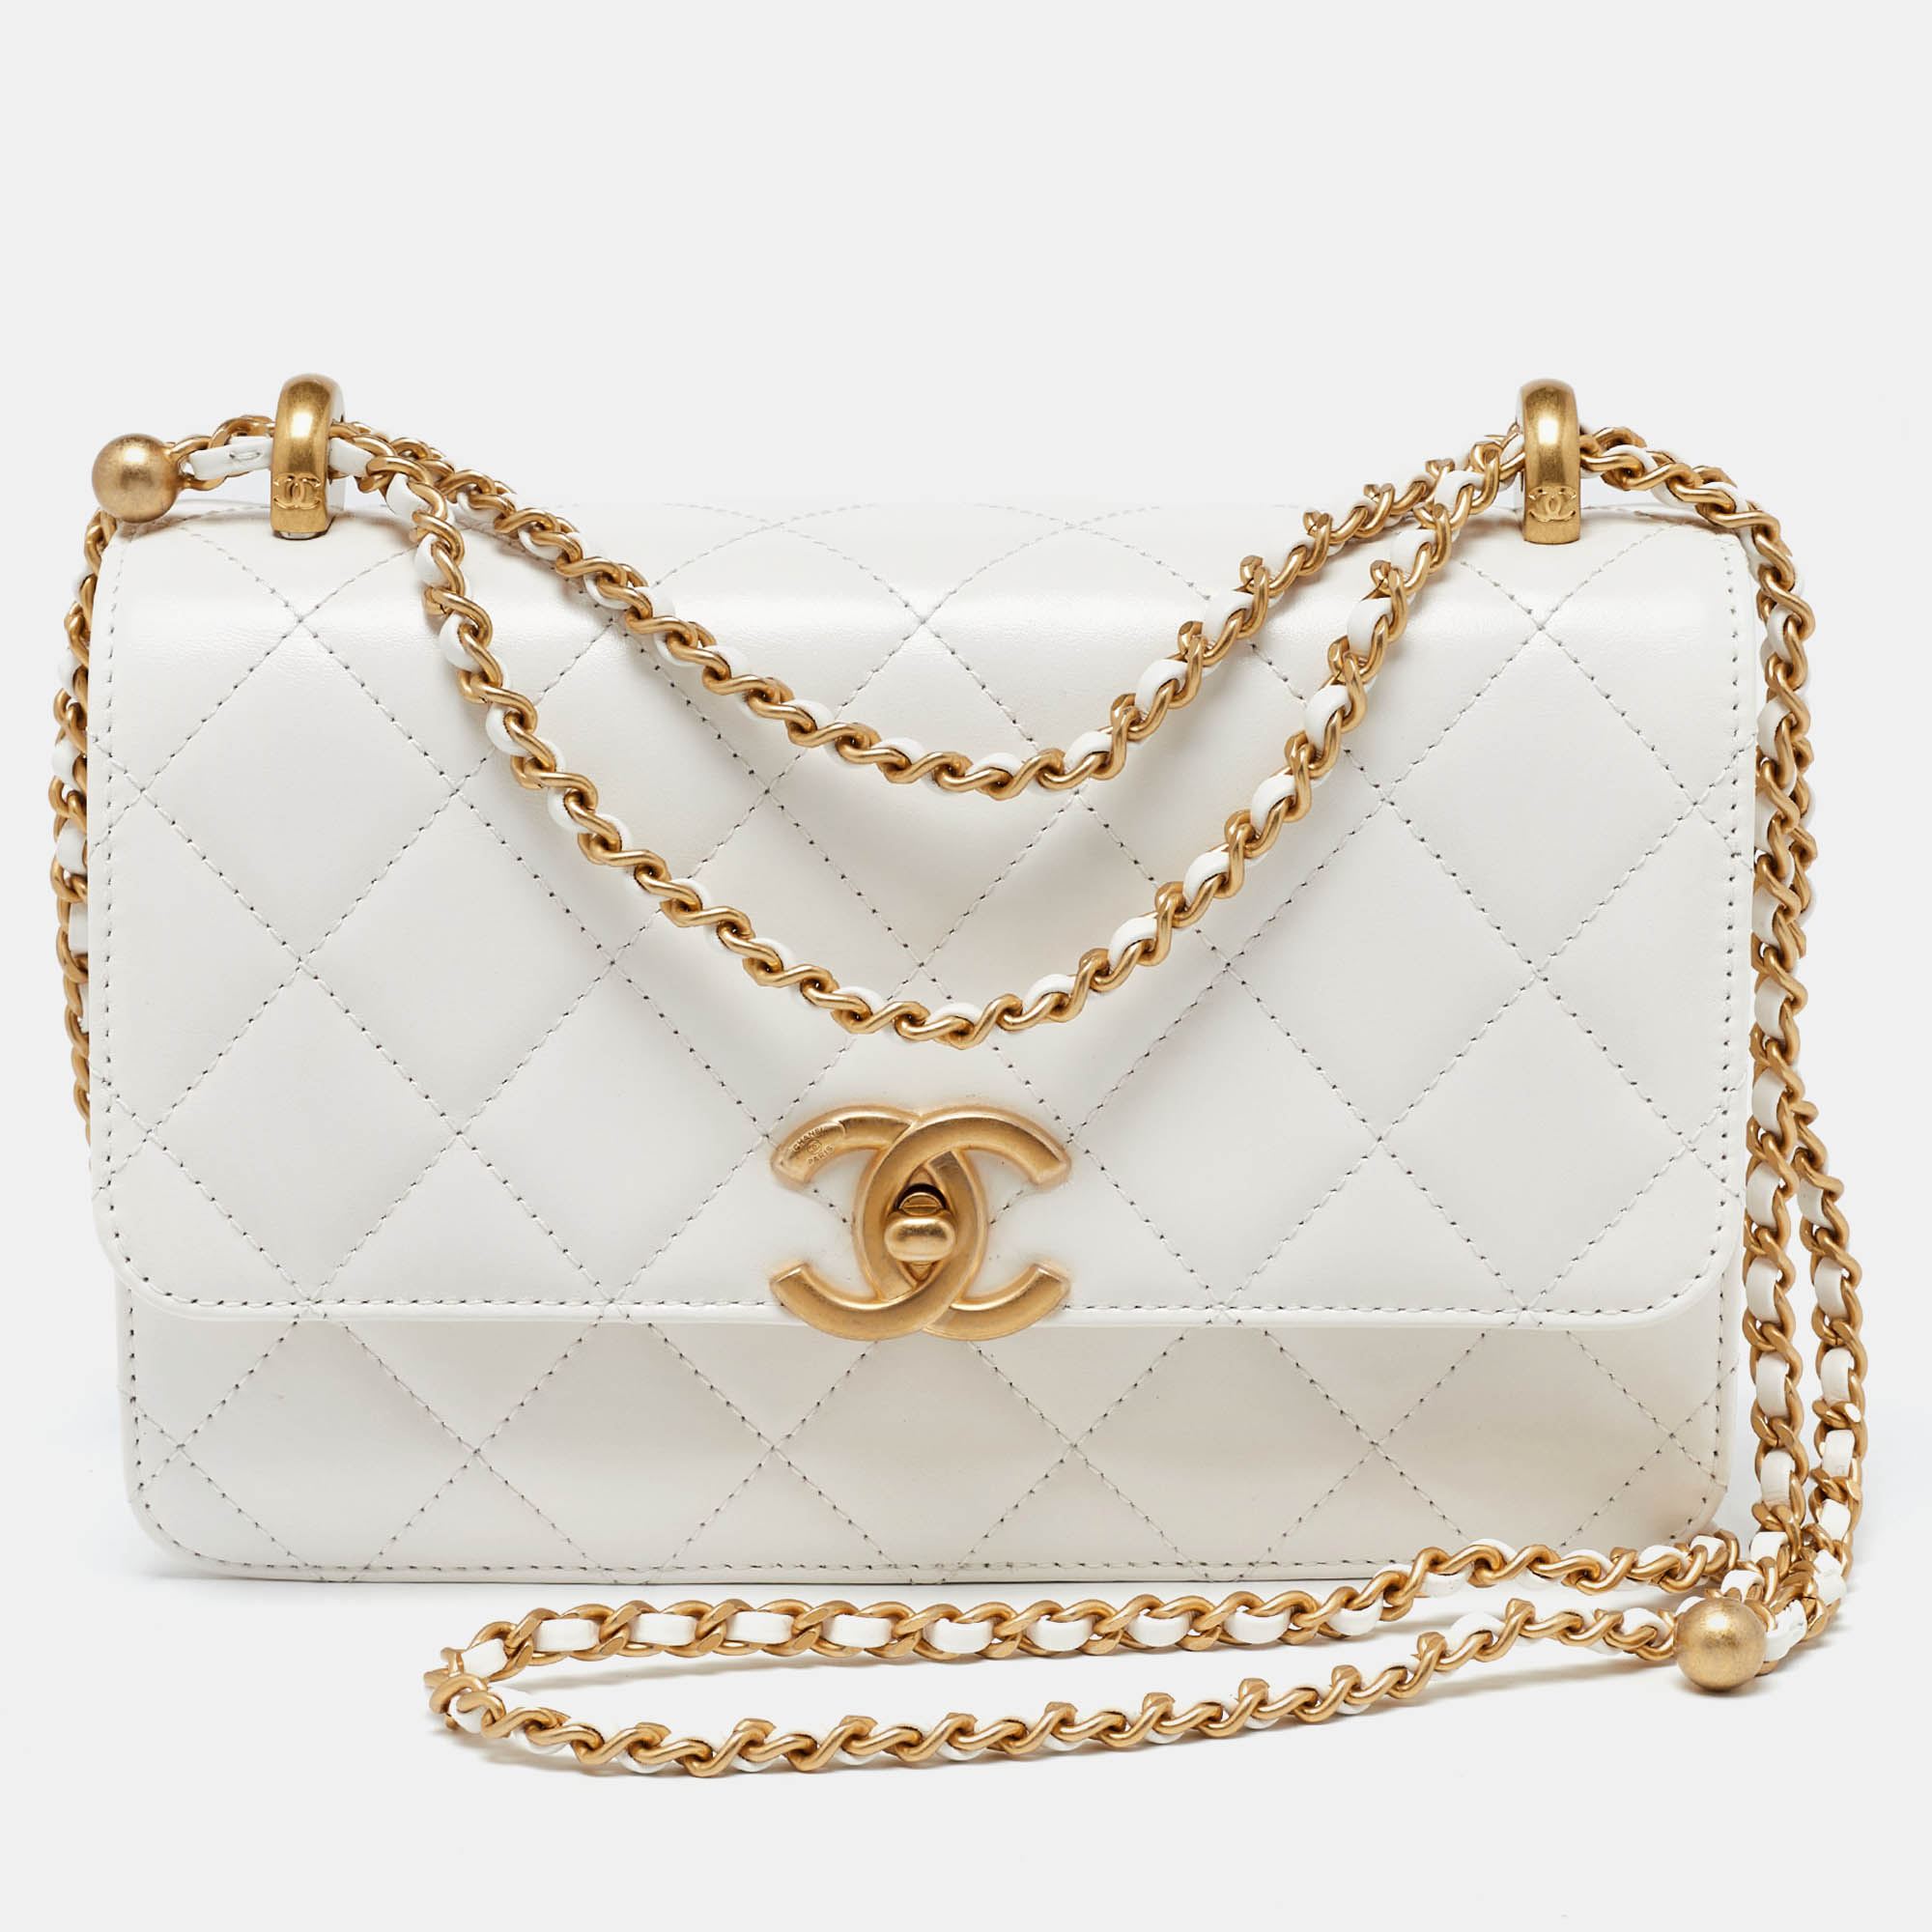 Chanel white quilted leather small flap shoulder bag